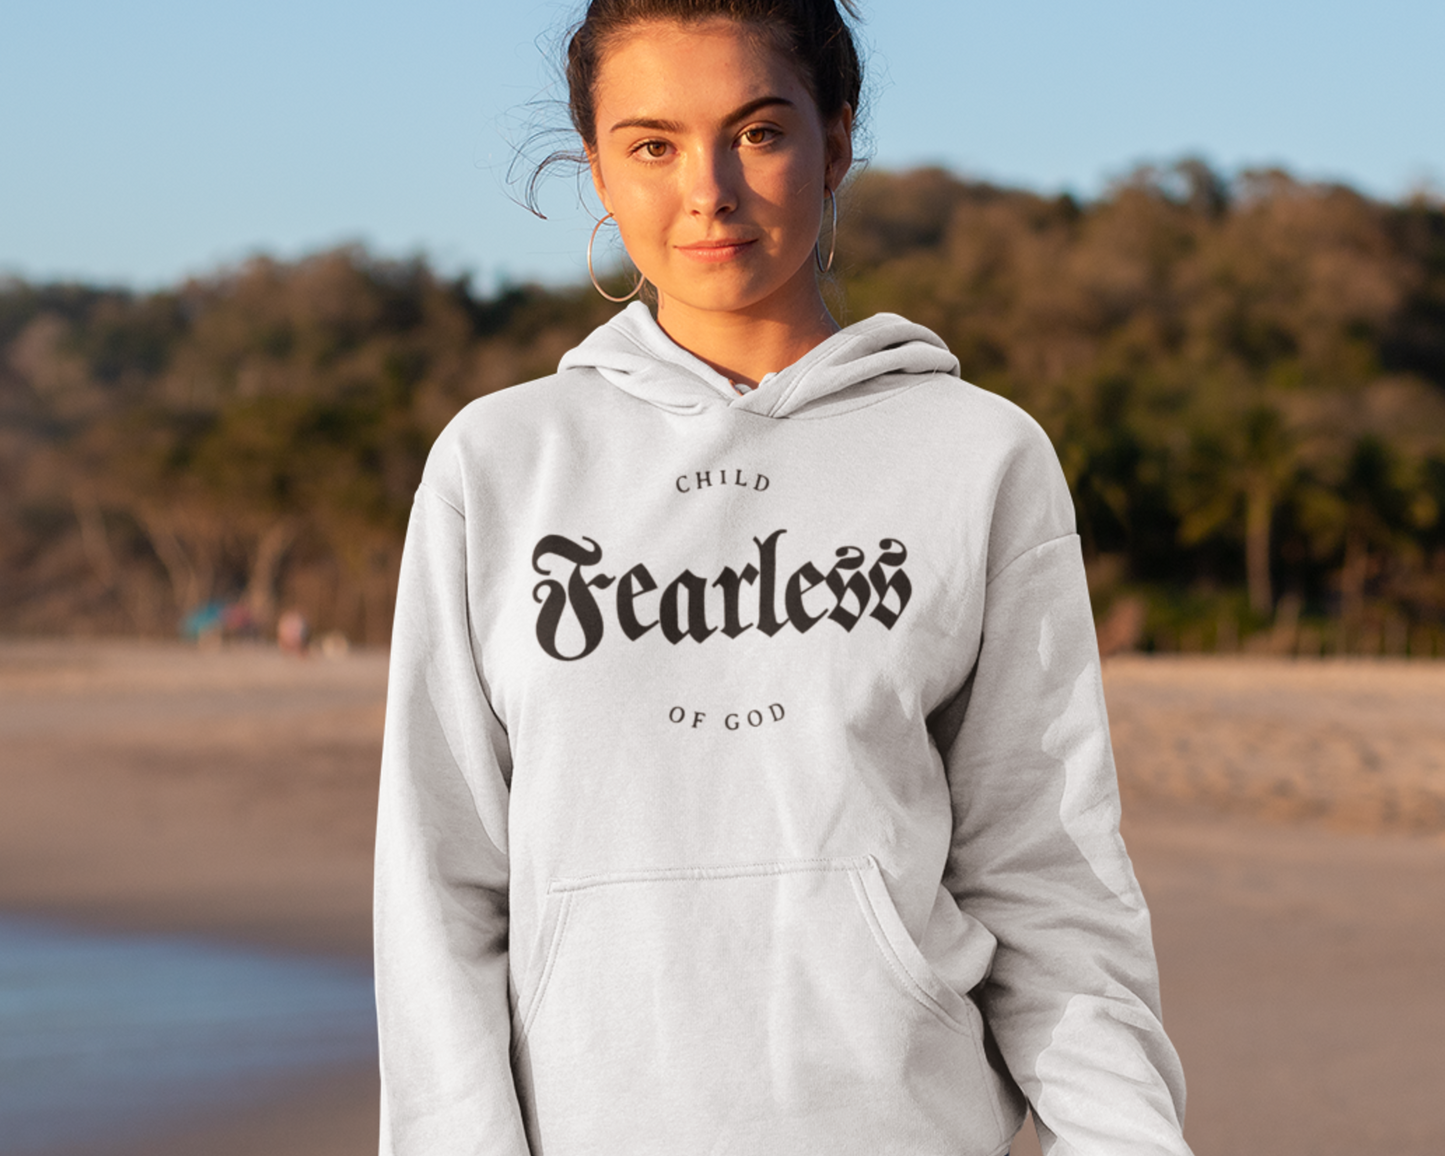 Fearless child of God Womens Hoodie